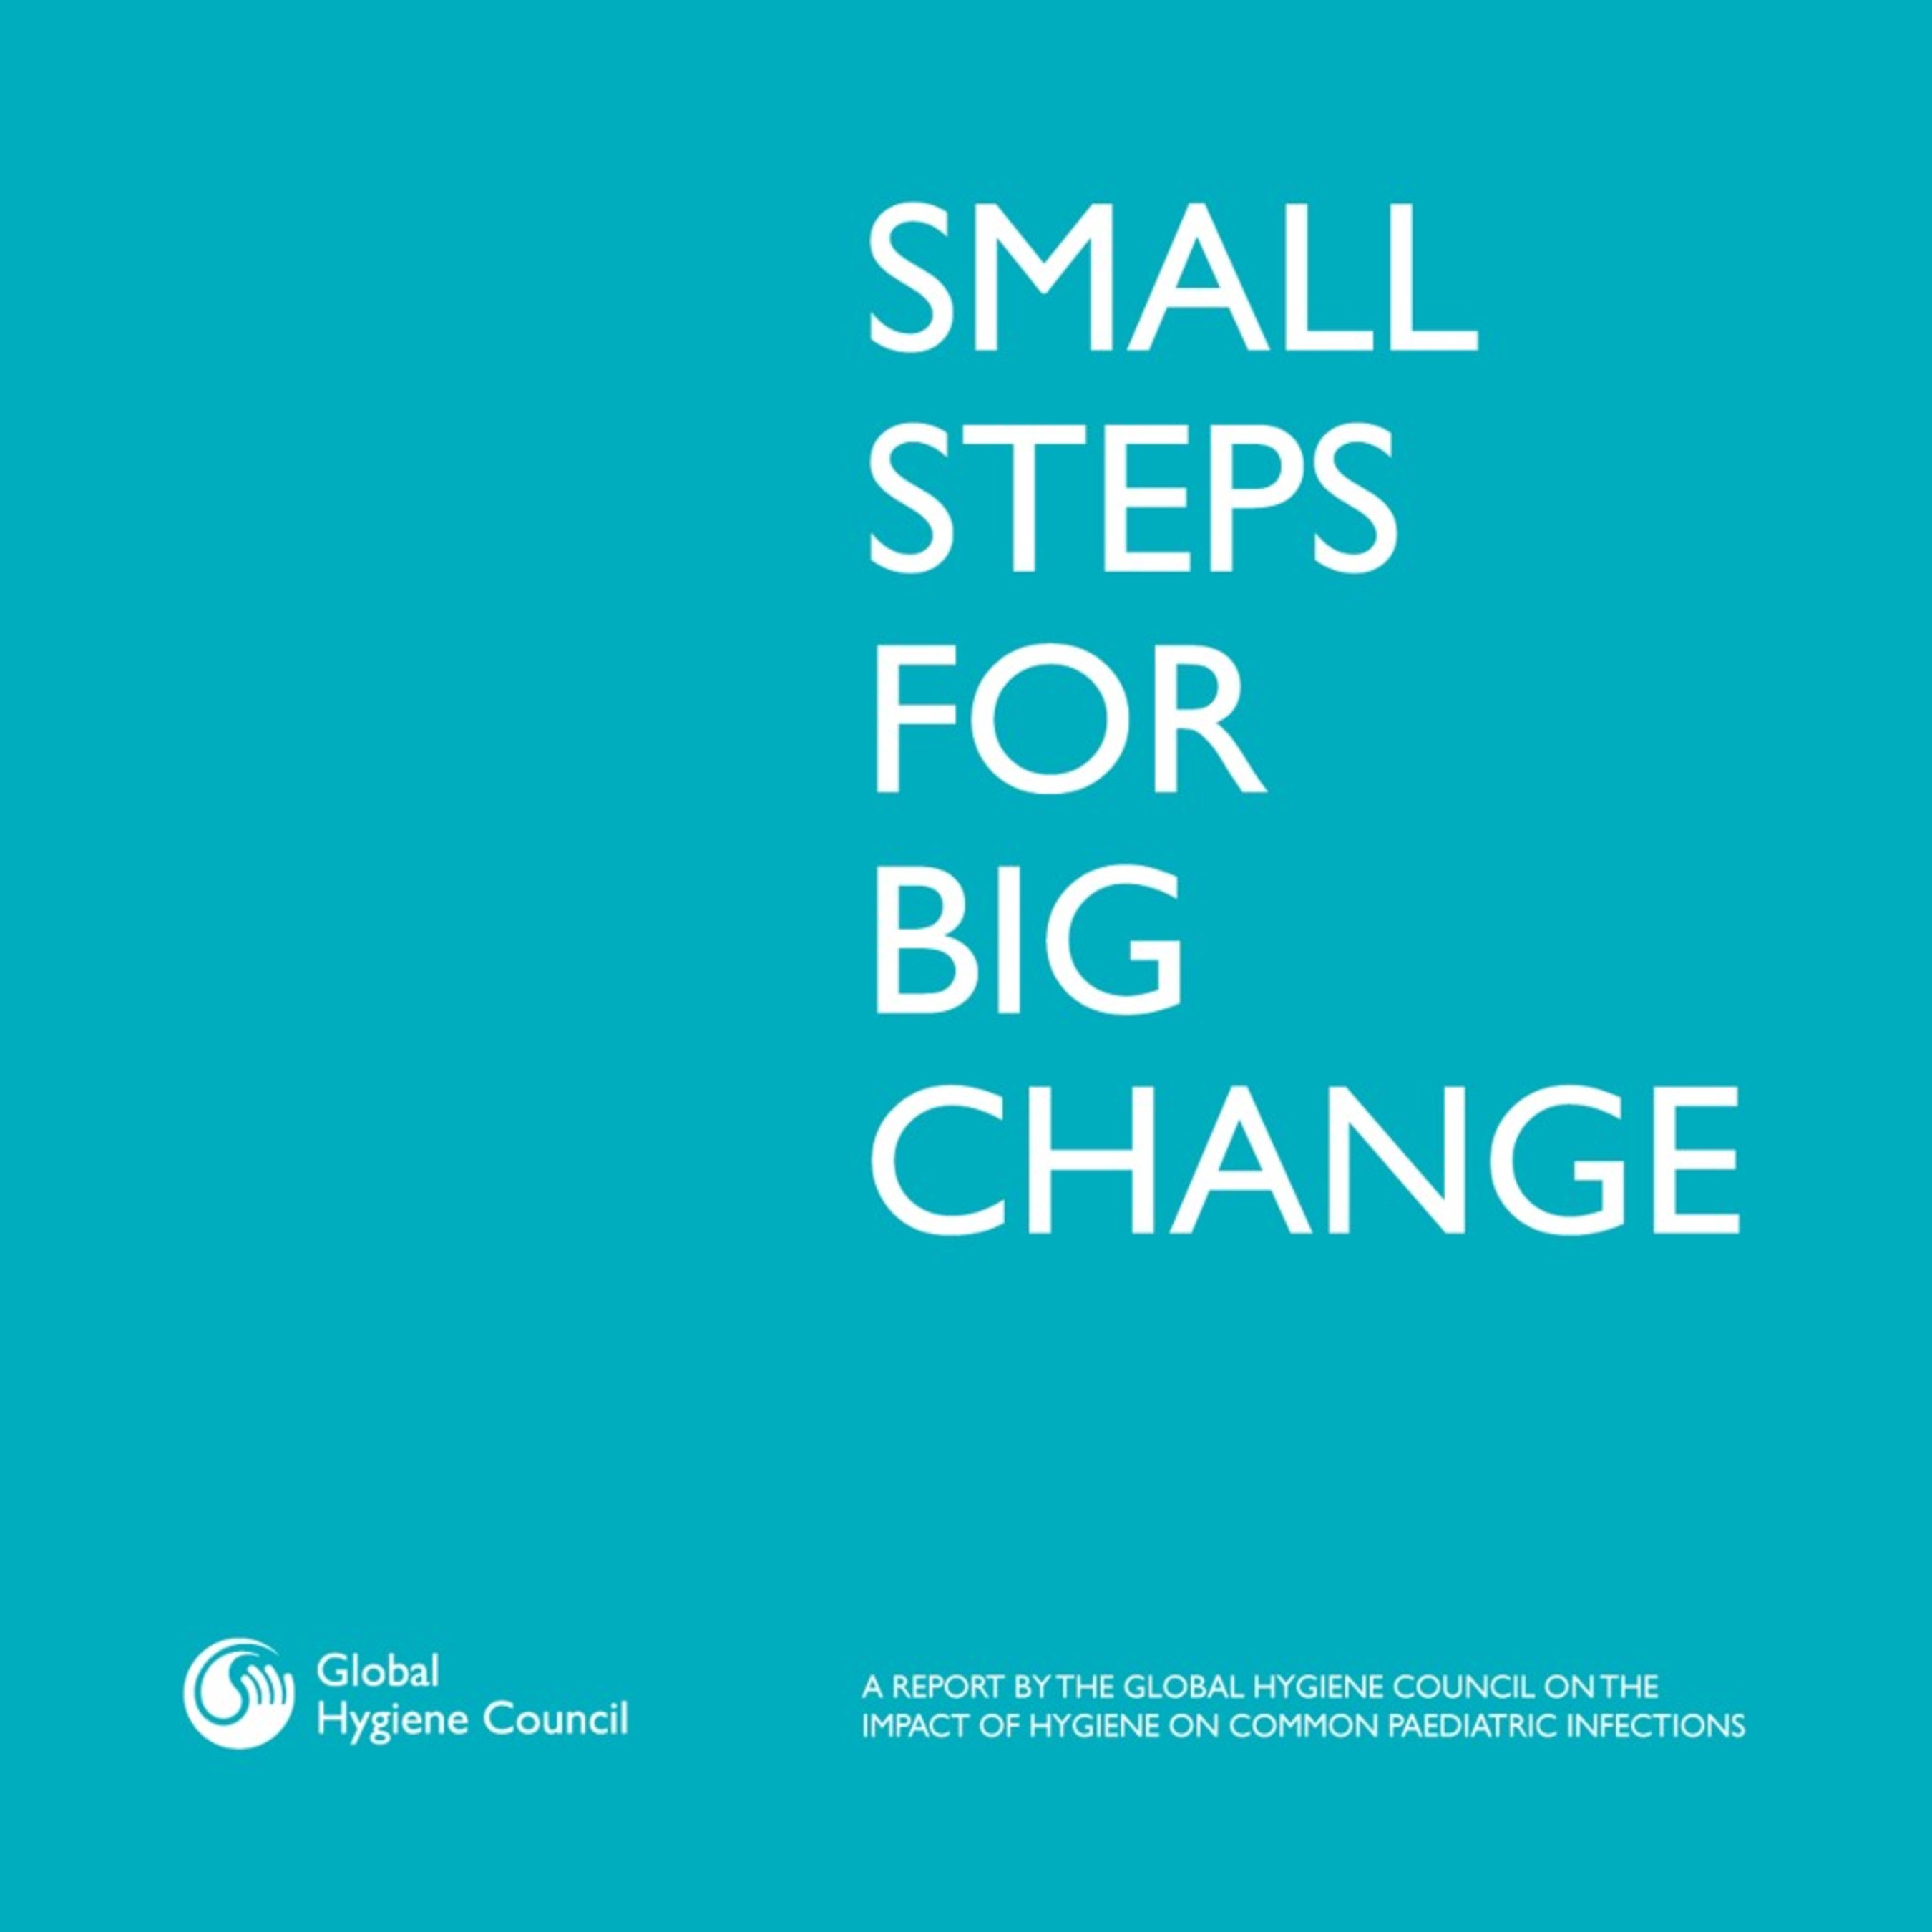 The Global Hygiene Council: Small Steps for Big Change Report (PRNewsFoto/The Global Hygiene Council) (PRNewsFoto/The Global Hygiene Council)